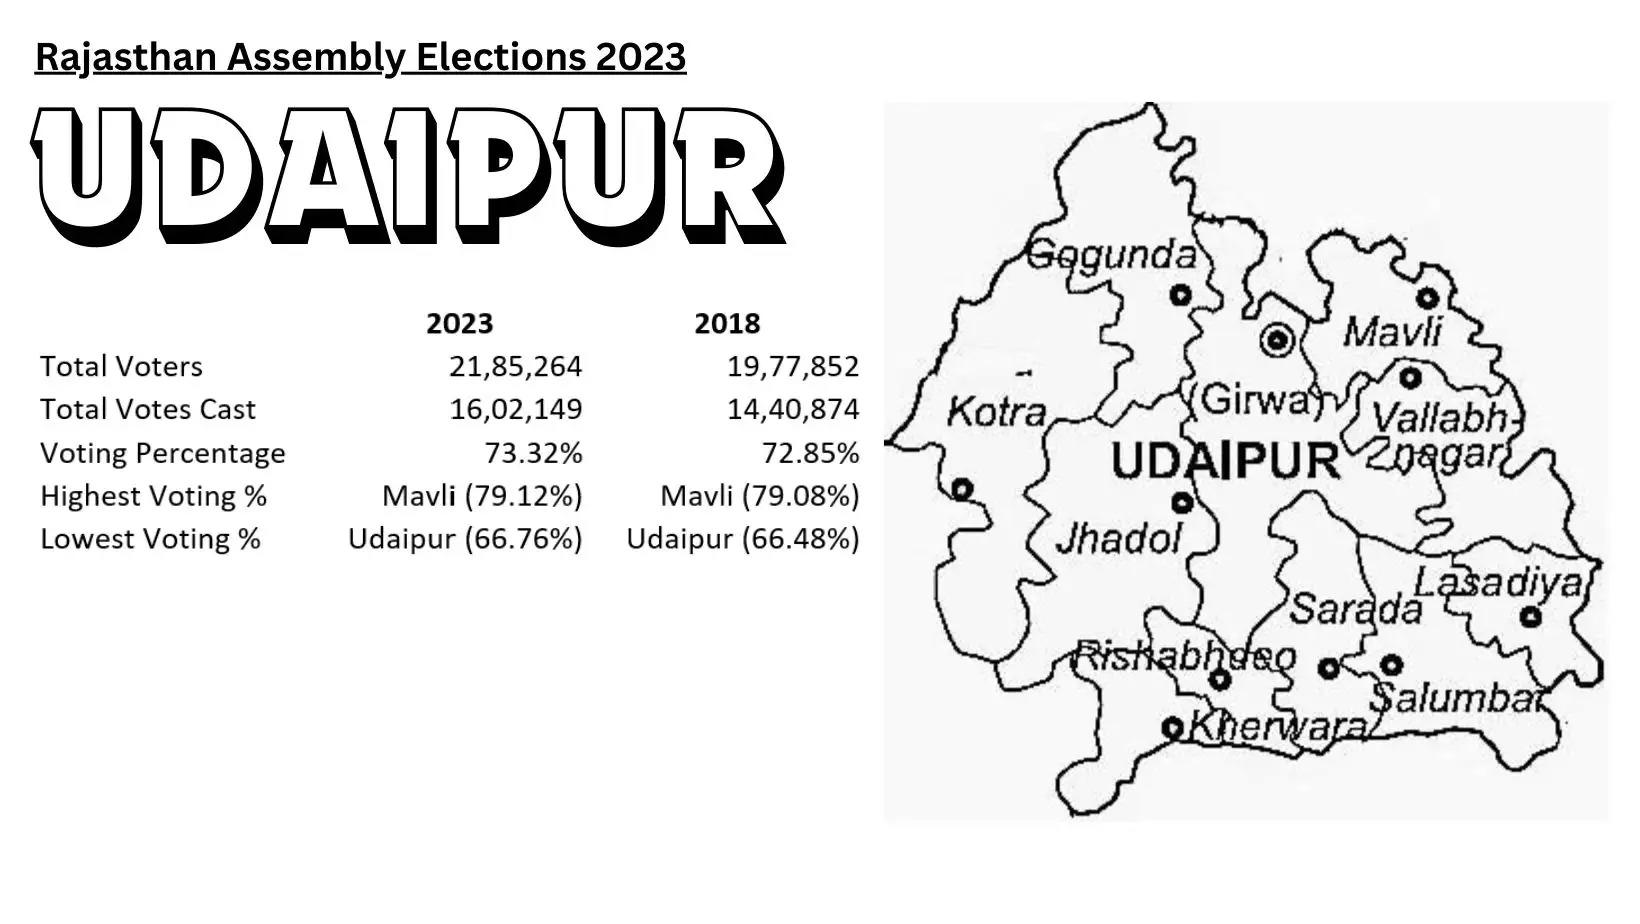 Voting Statistics for 8 constituencies in Udaipur District. Who are the Candidates contesting Elections in Udaipur District